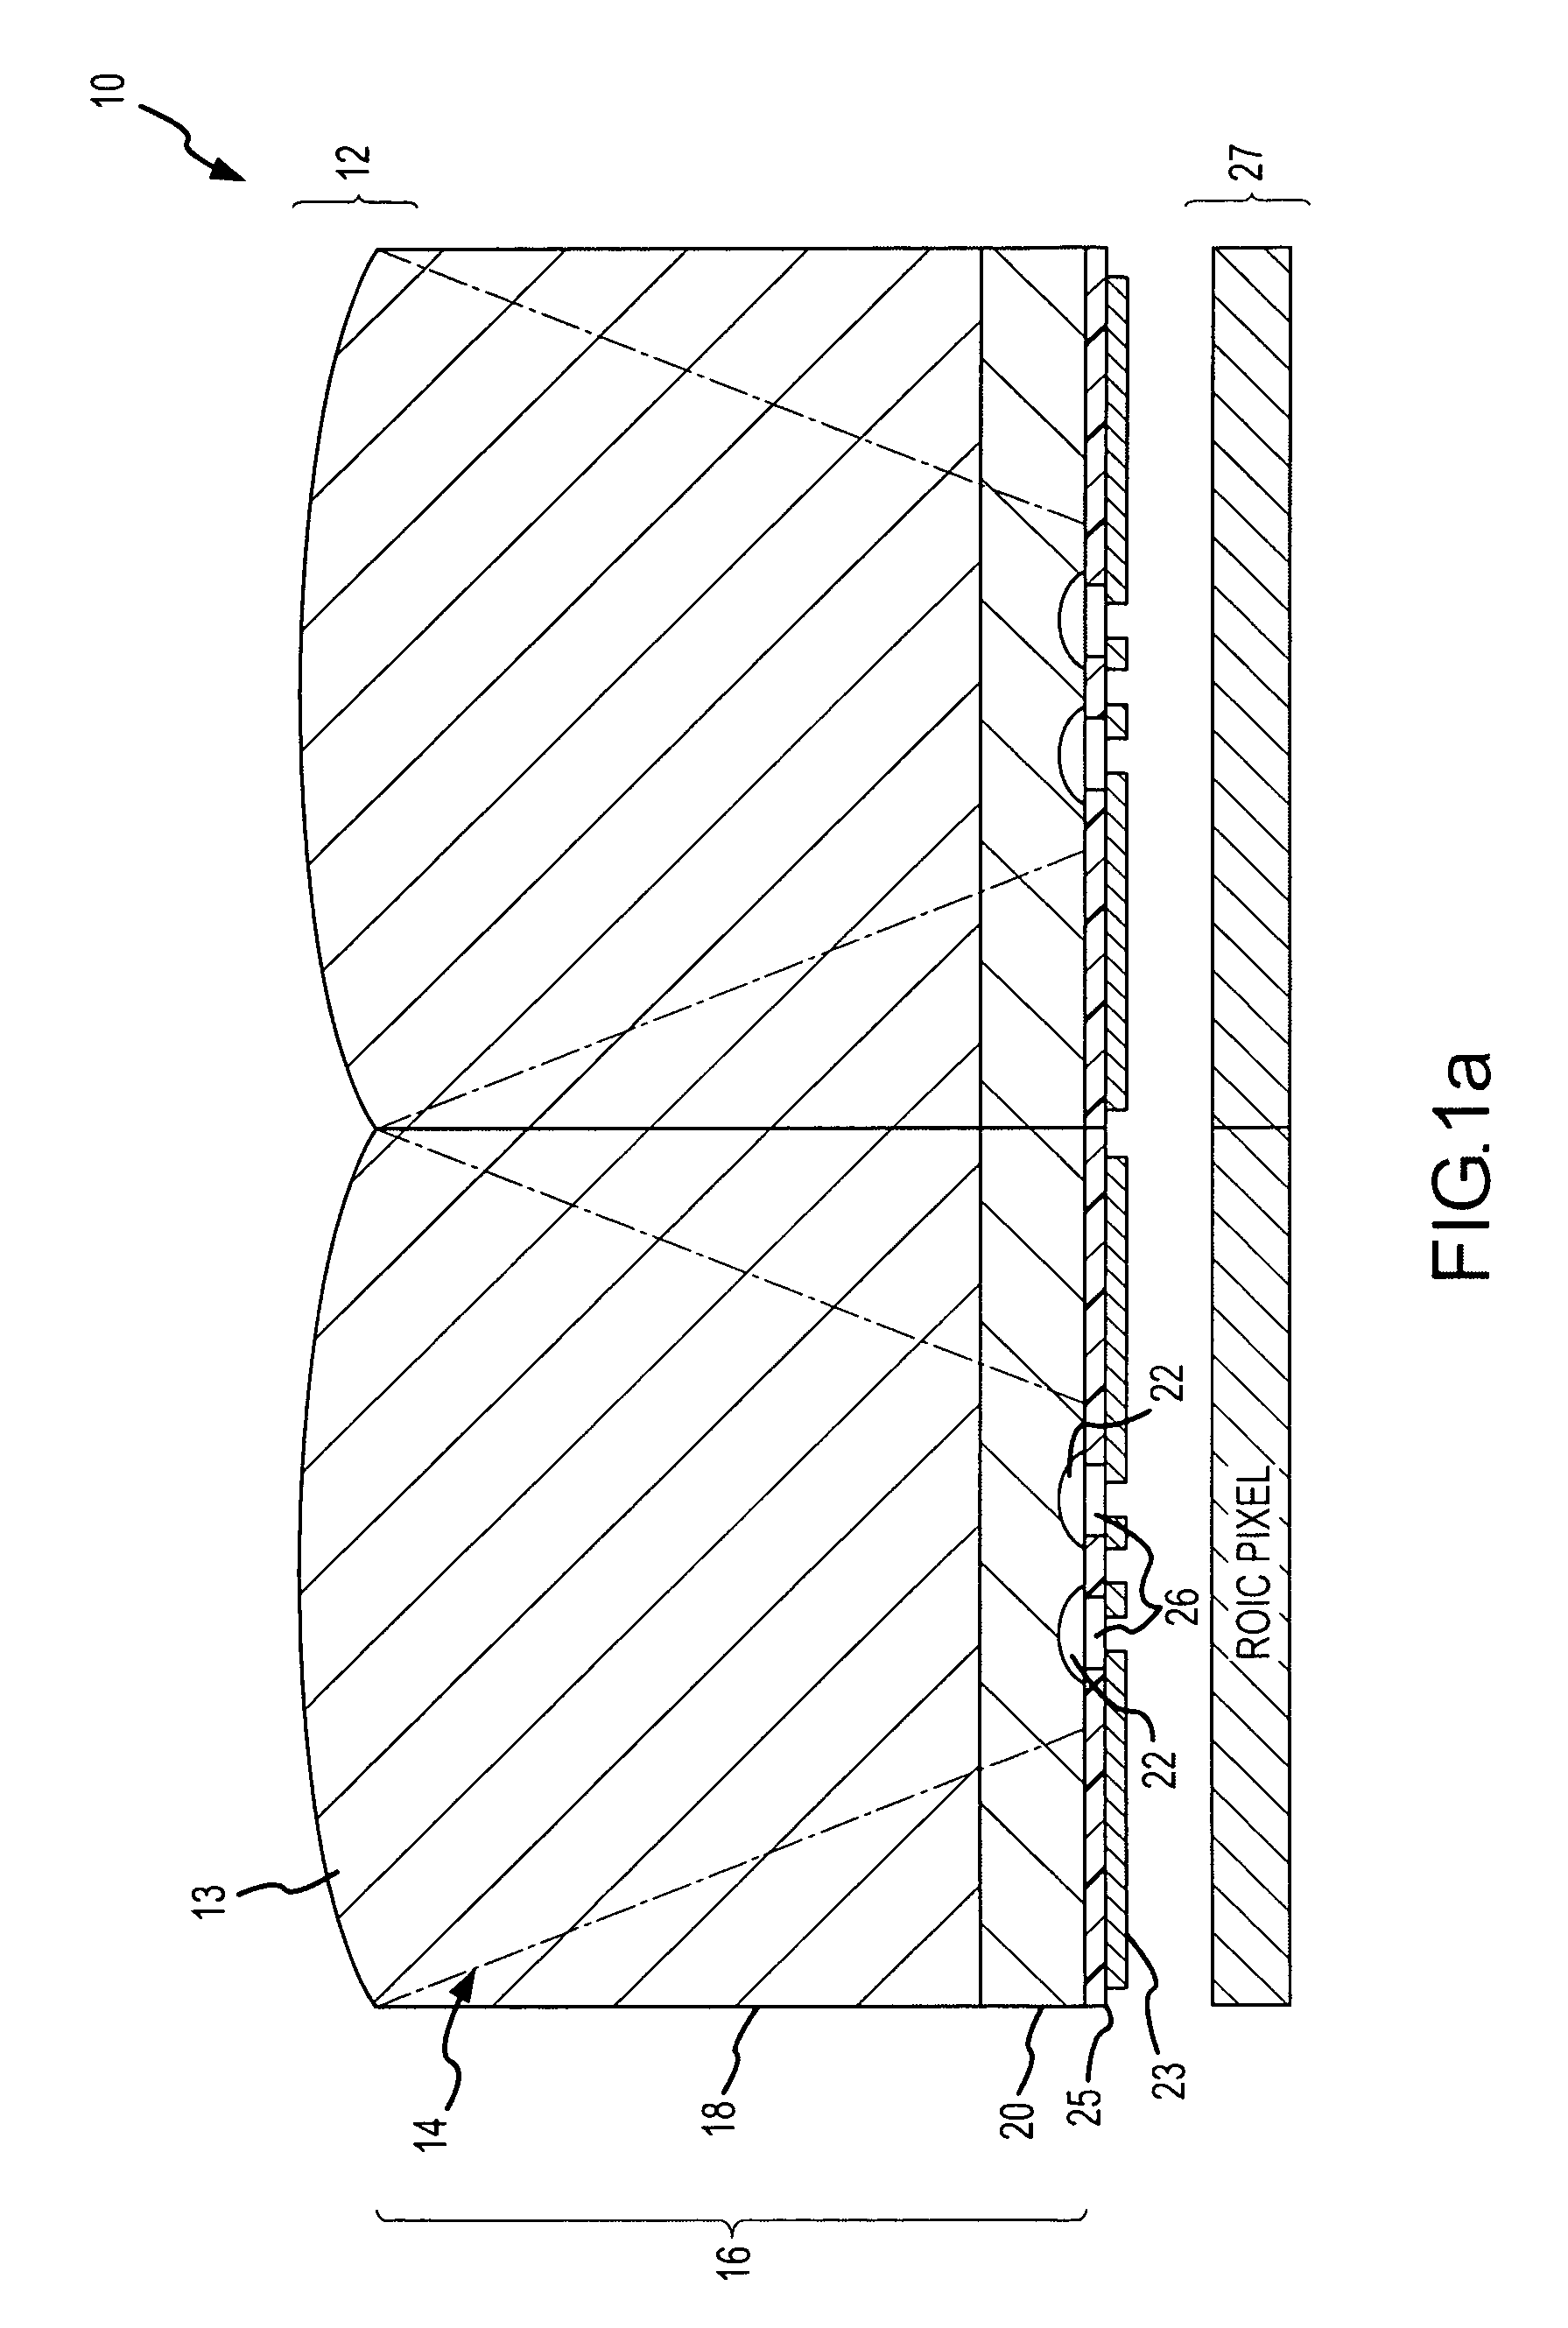 Microlensed focal plane array (FPA) using sub-pixel de-selection for improved operability